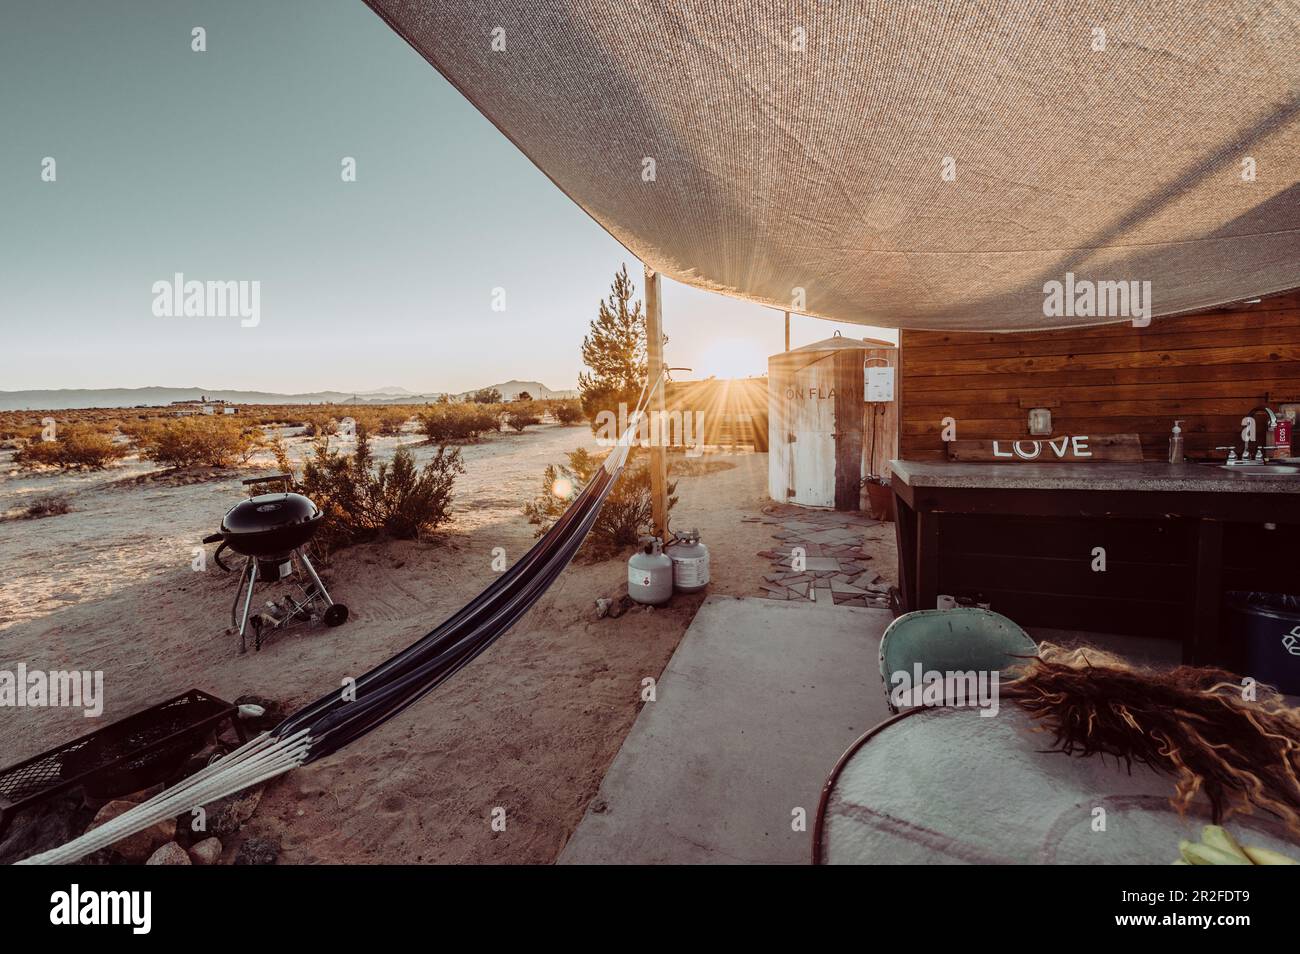 Airbnb property with caravan and outdoor area in Joshua Tree National Park, Joshua Tree, Los Angeles, California, USA, North America Stock Photo